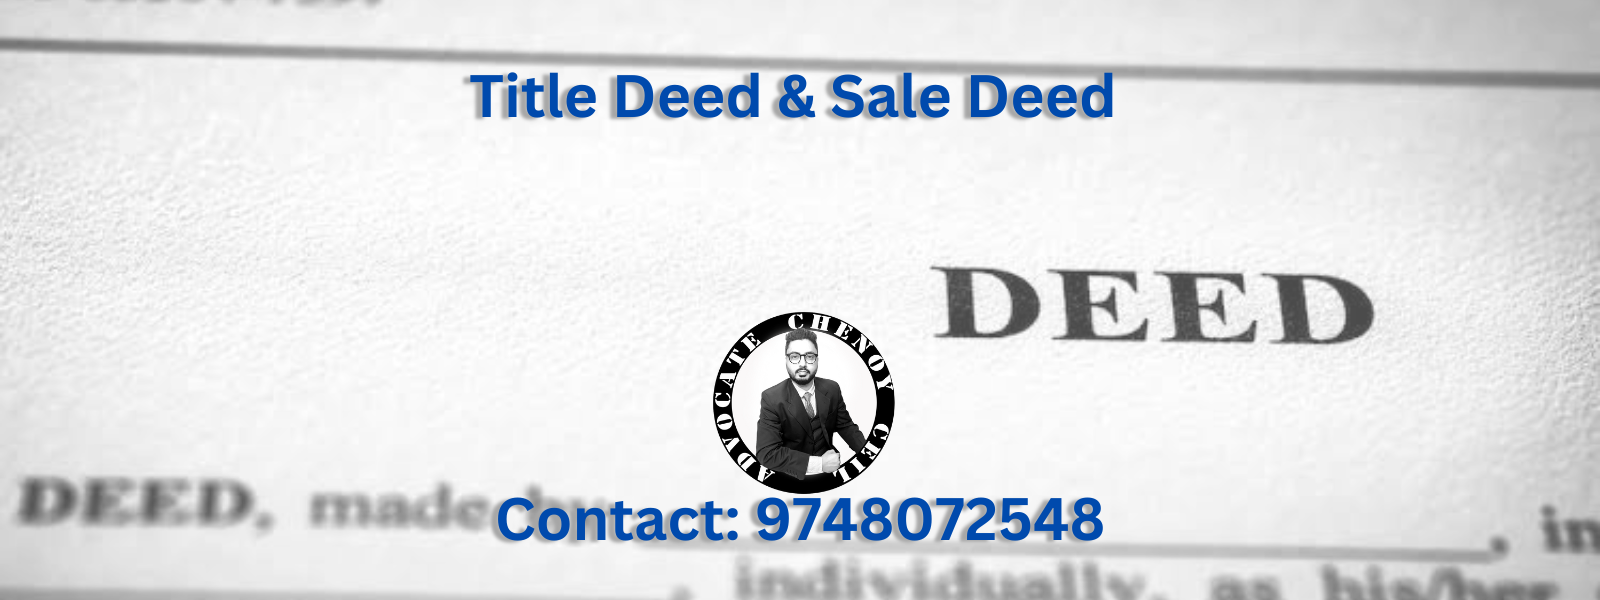 sale deed and title deed differences